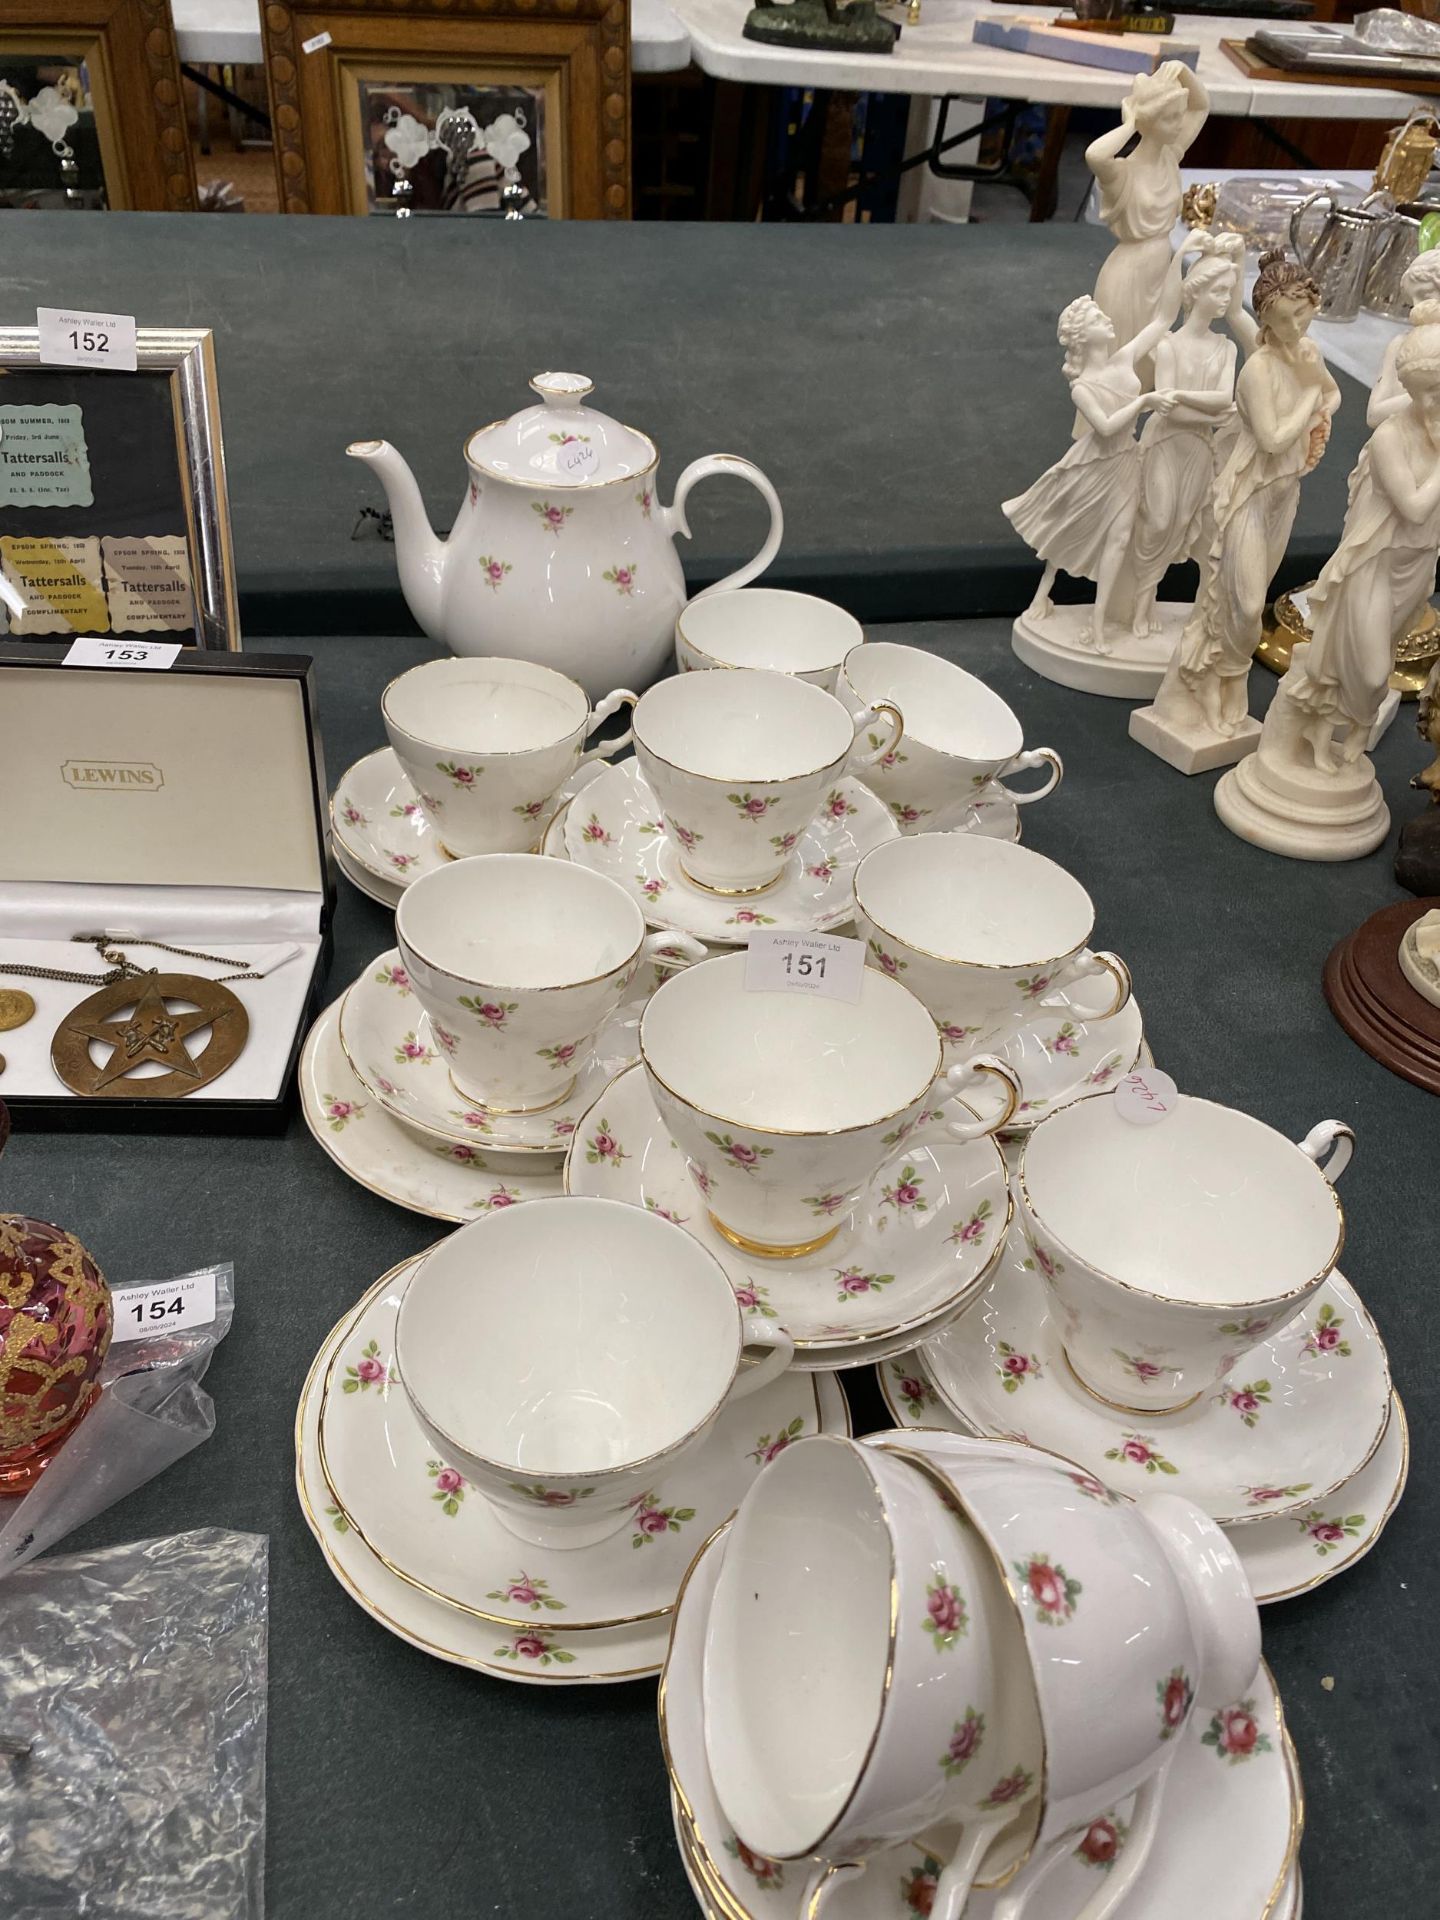 A VINTAGE ARGYLE TEASET TO INCLUDE A TEAPOT, SUGAR BOWL, CUPS, SAUCERS AND SIDE PLATES - Image 3 of 5